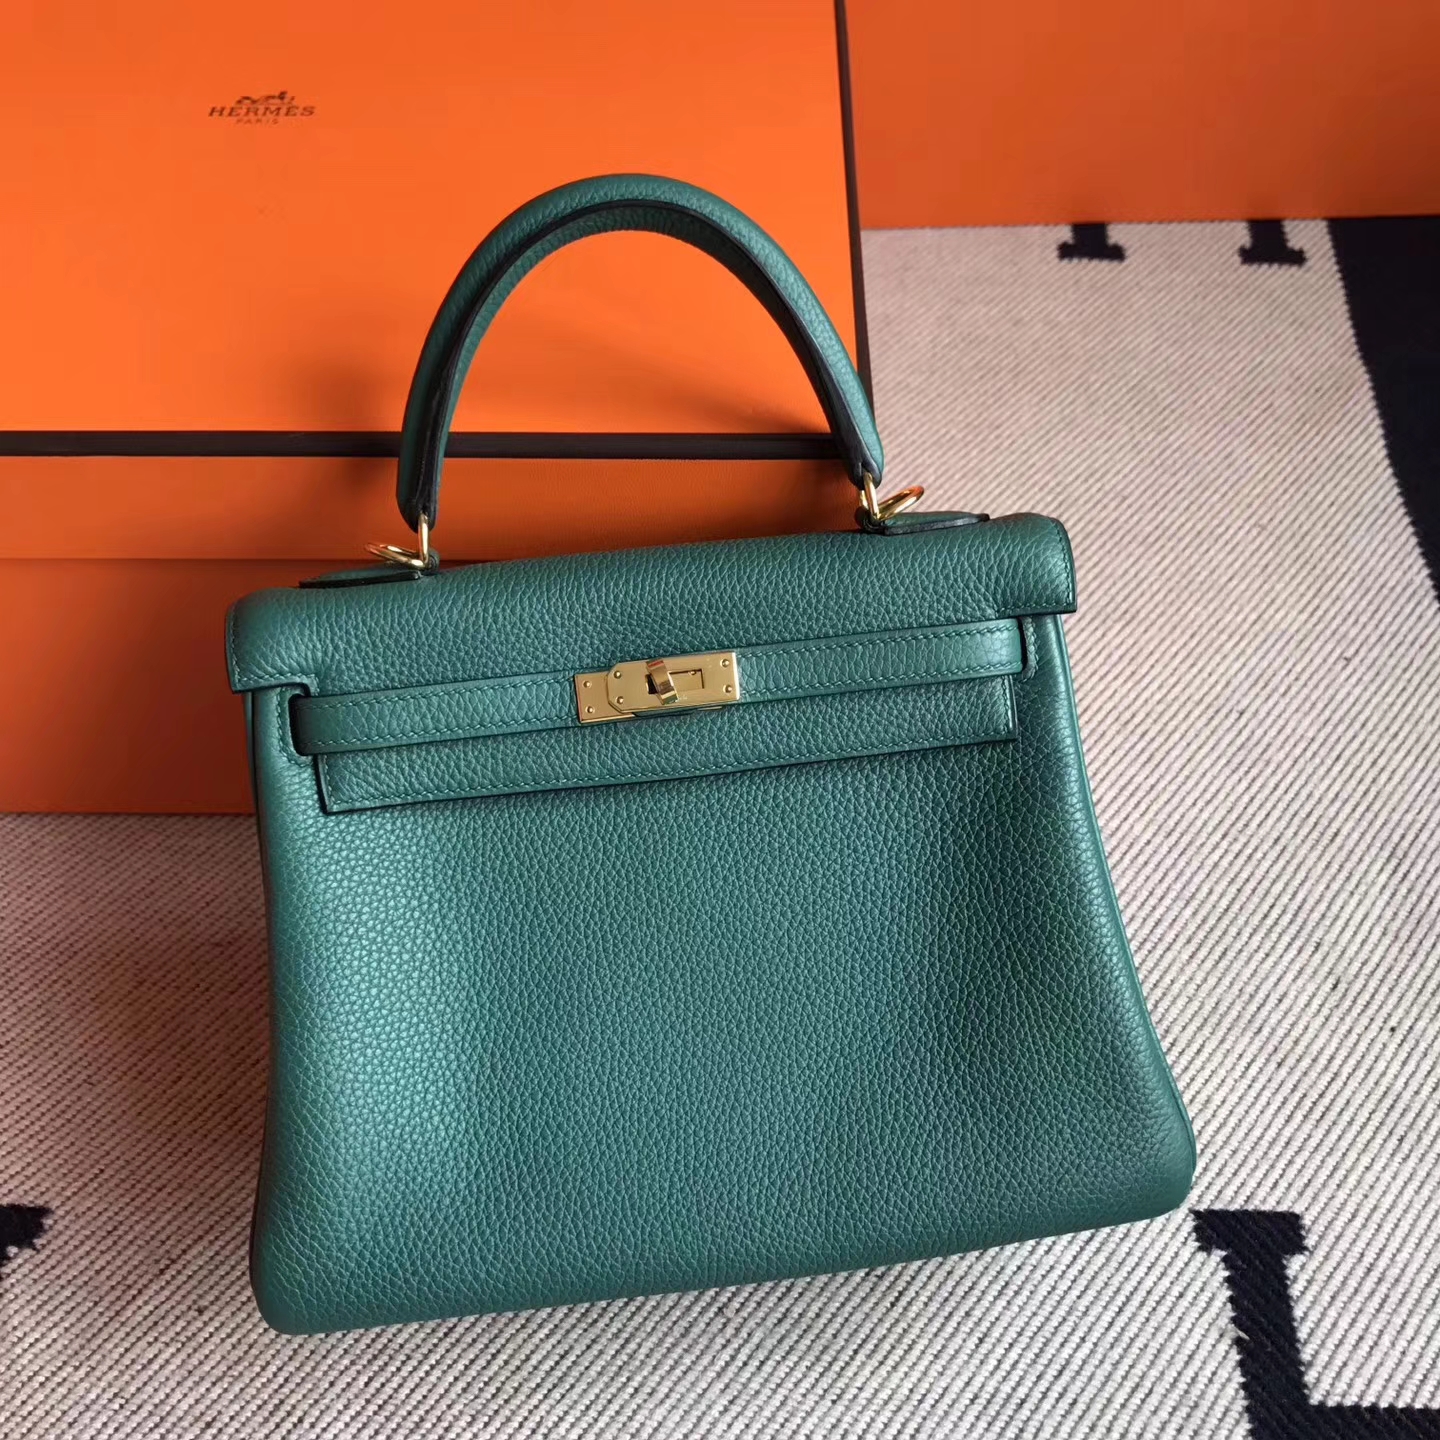 New Arrival Hermes Z6 Malachite Green Togo Leather Kelly Tote Bag25cm